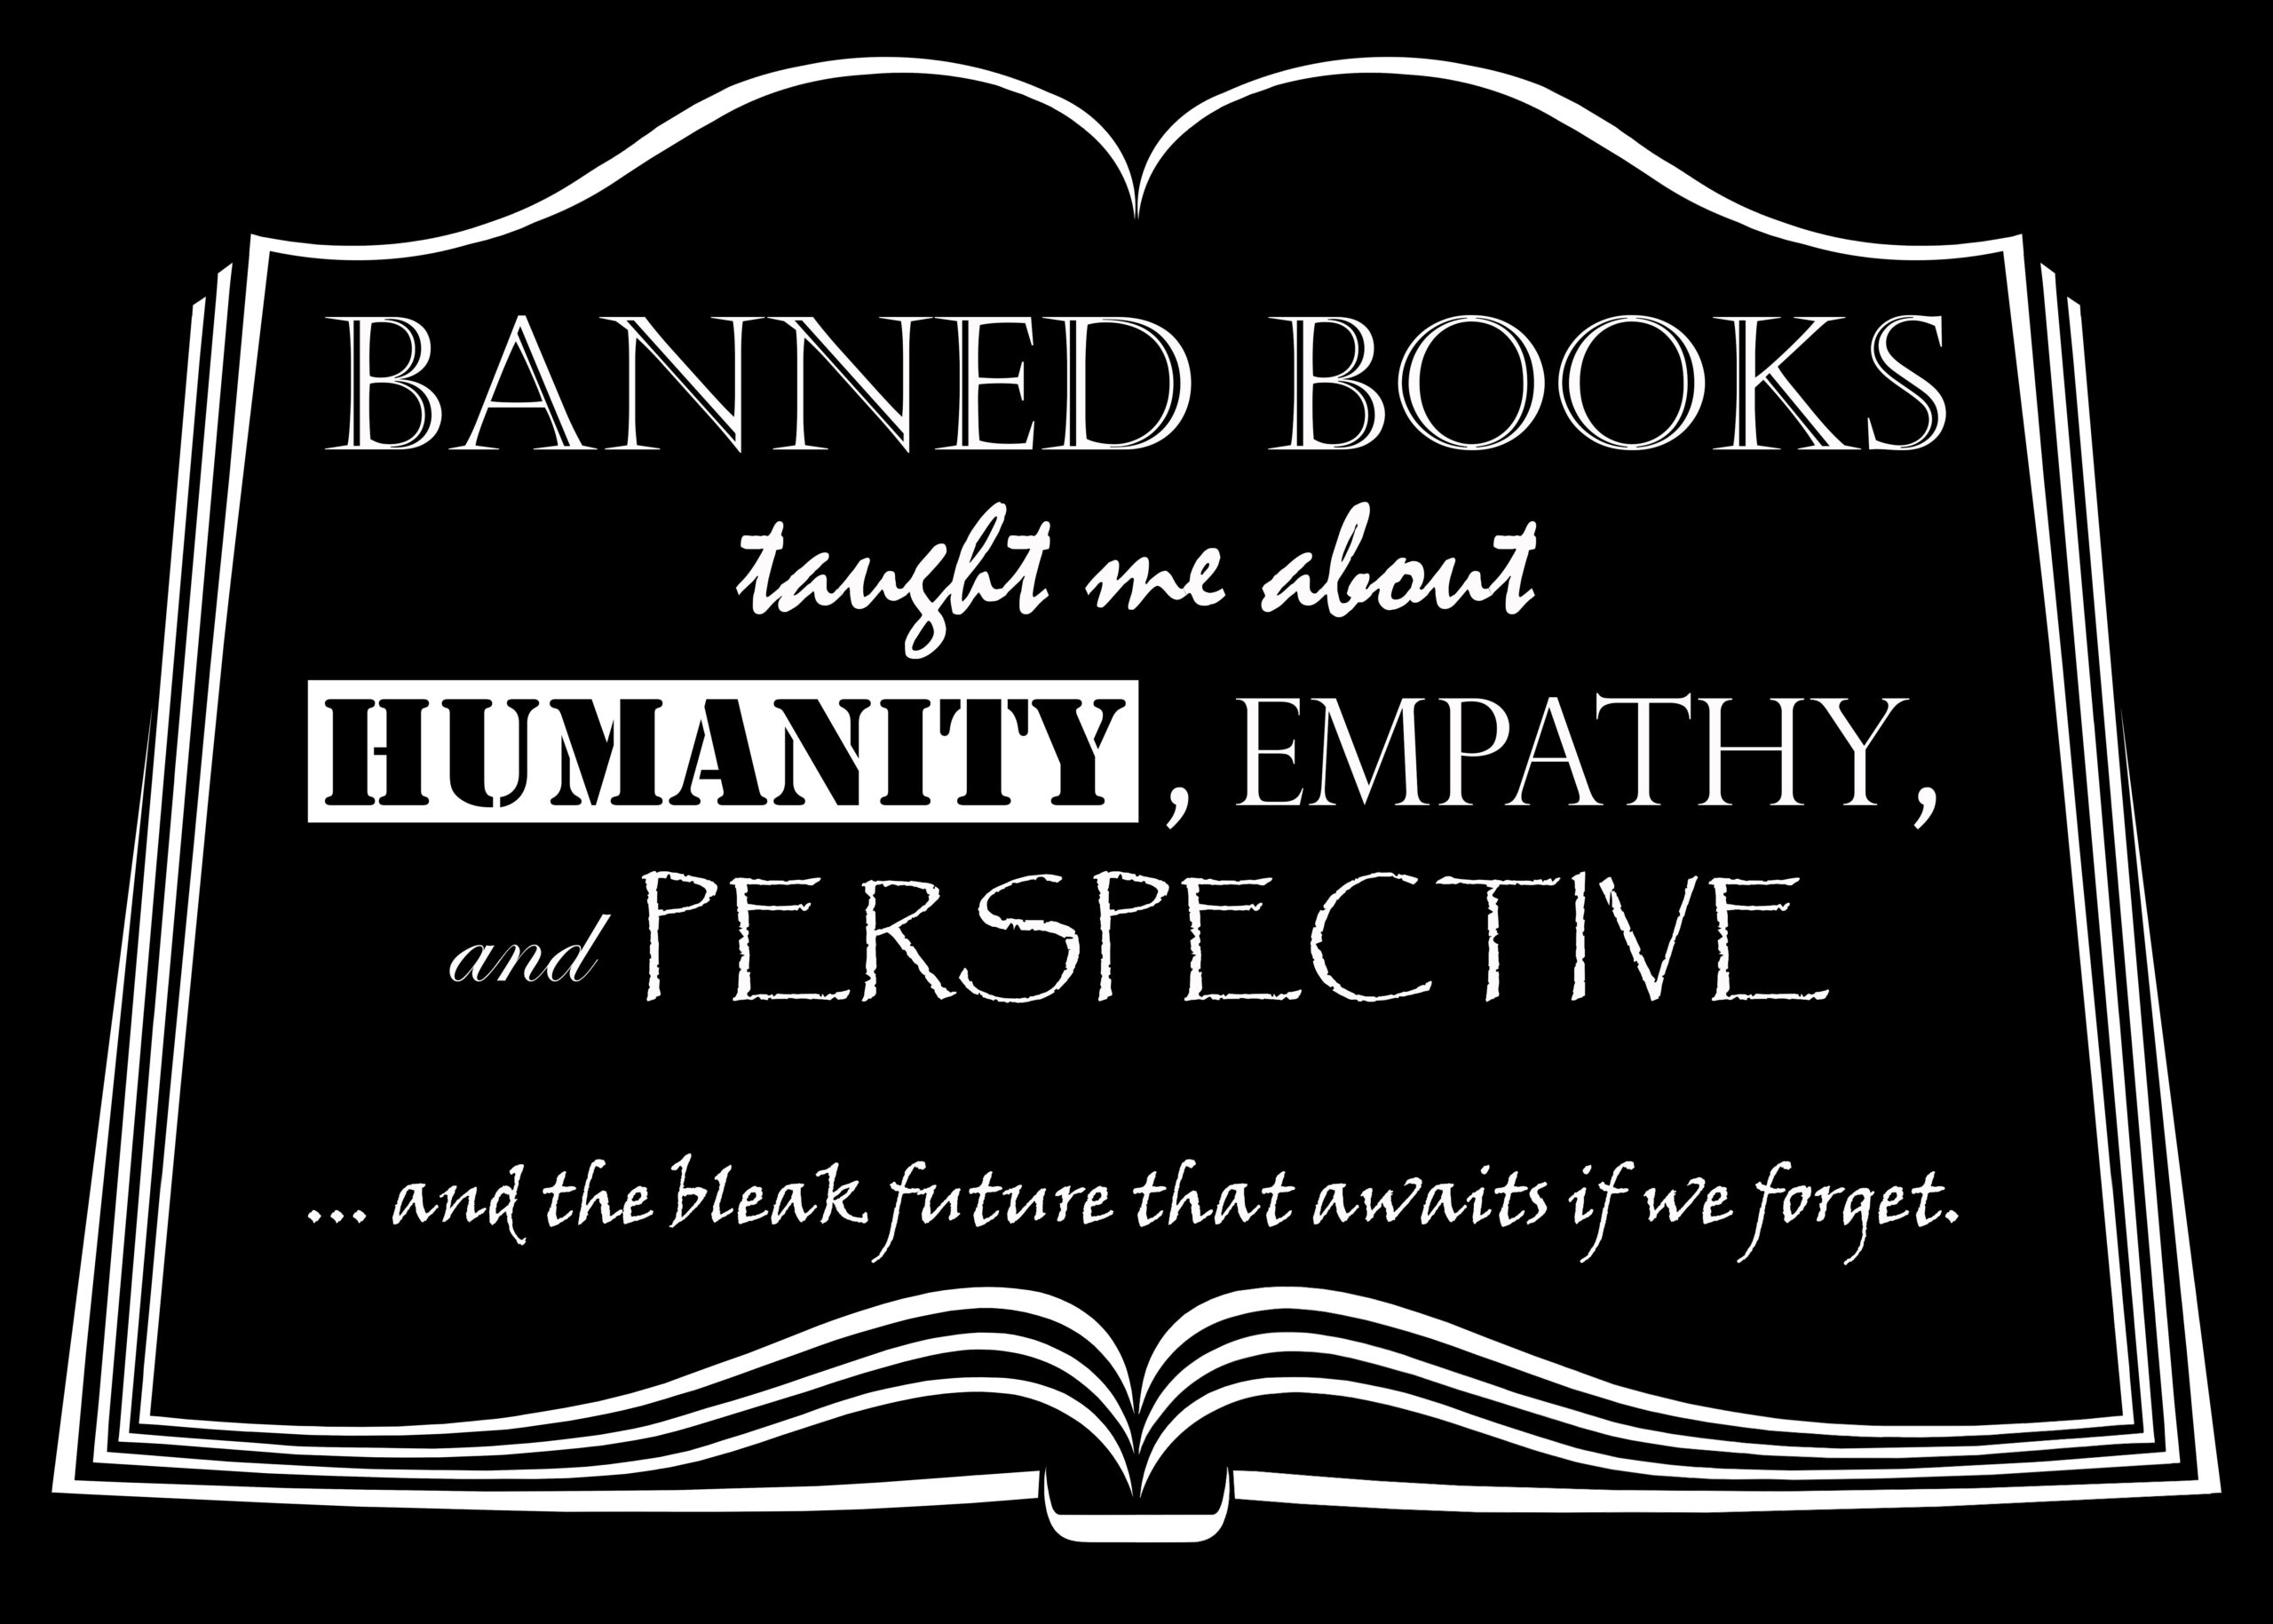 Read Banned Books merchandise and apparel design by Sara A. Noe